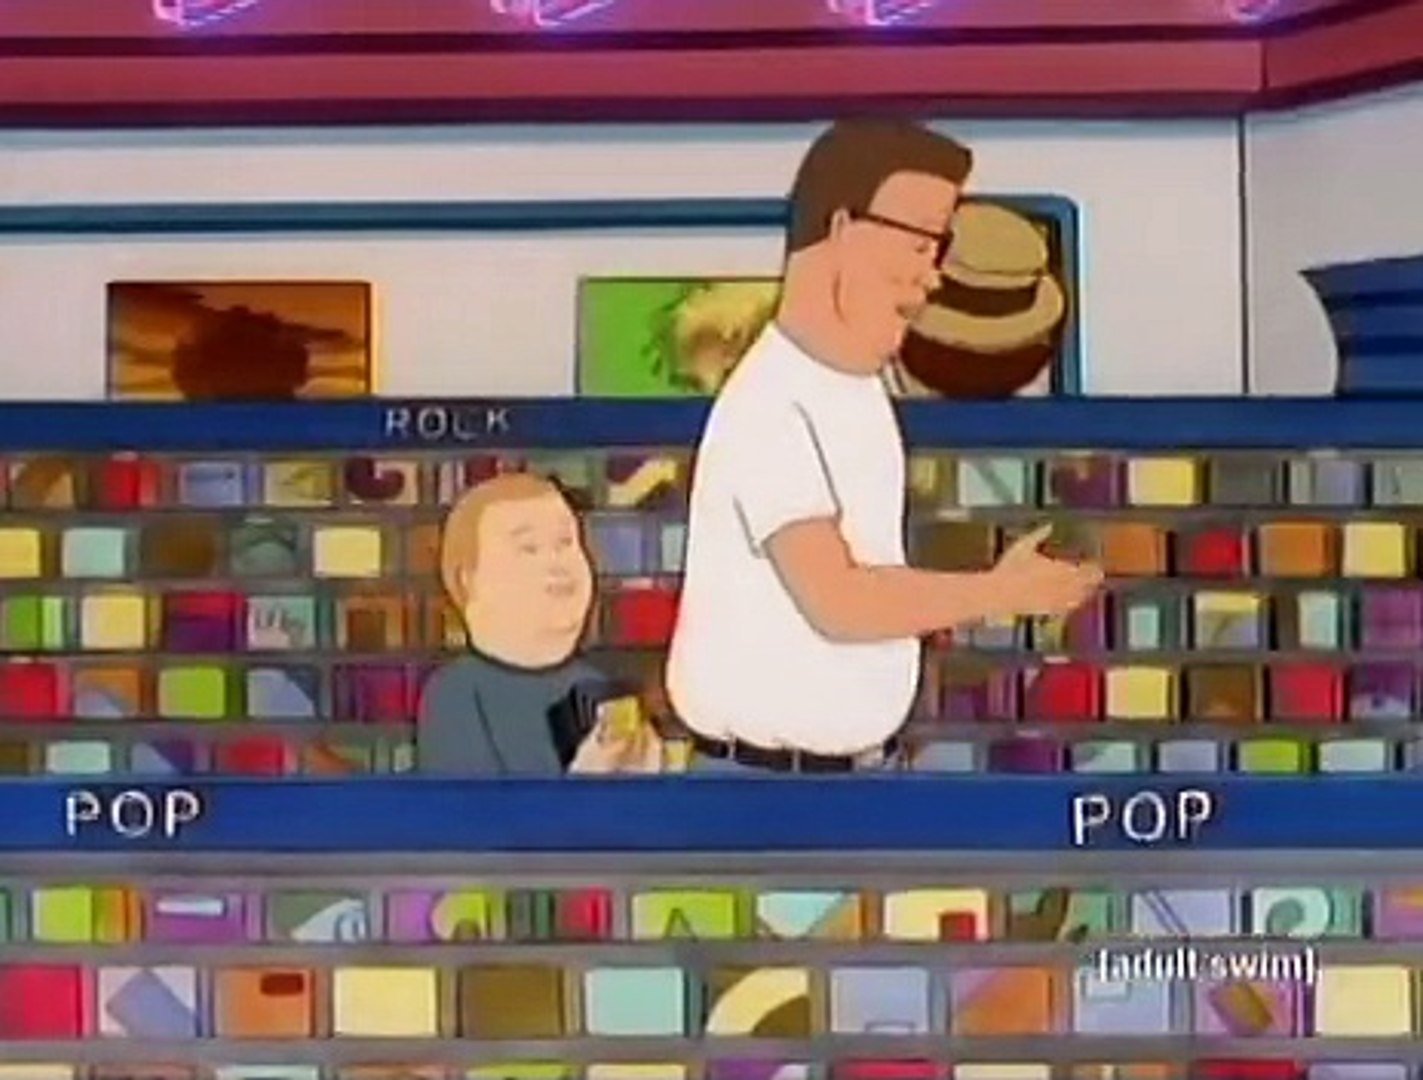 King of the Hill Season 1 by King of the Hill - Dailymotion